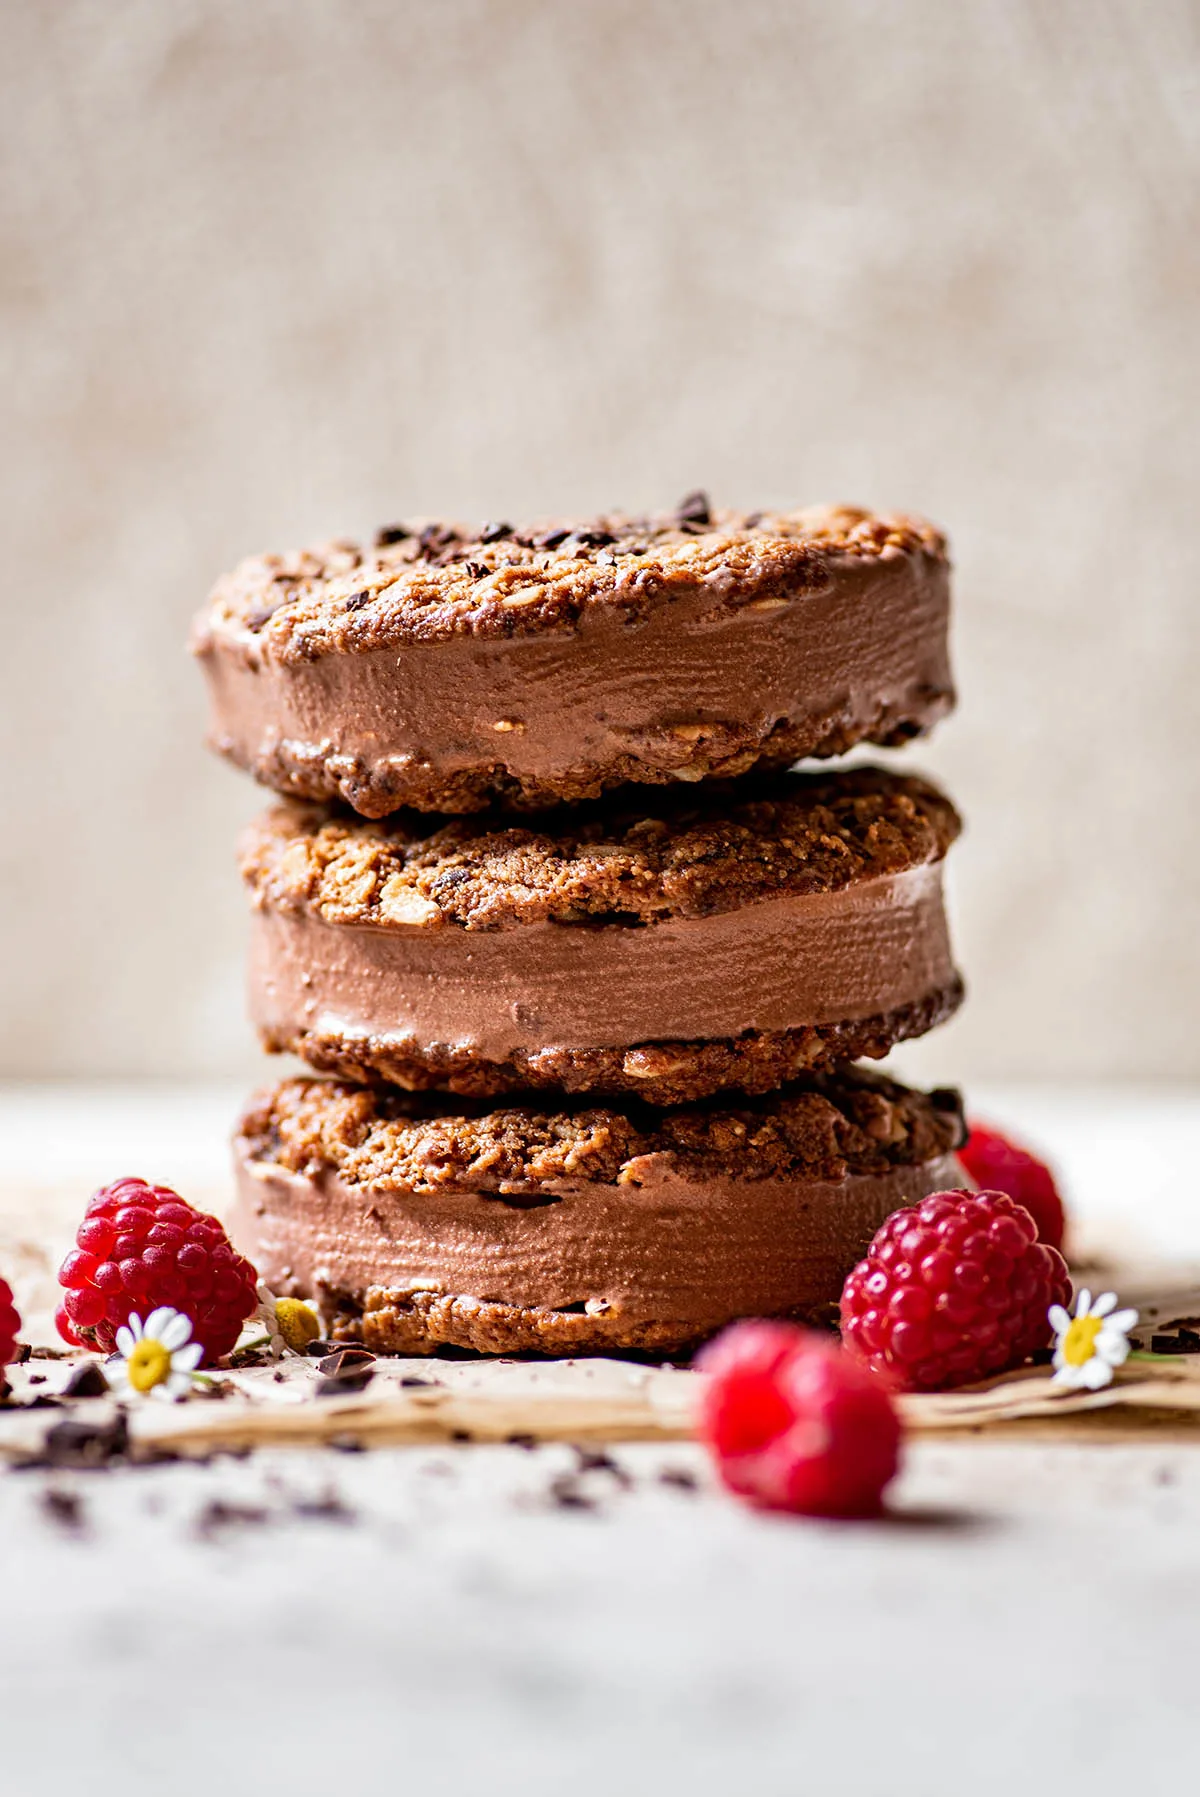 A stack of three chocolate coconut milk ice cream sandwiches with berries on the side.